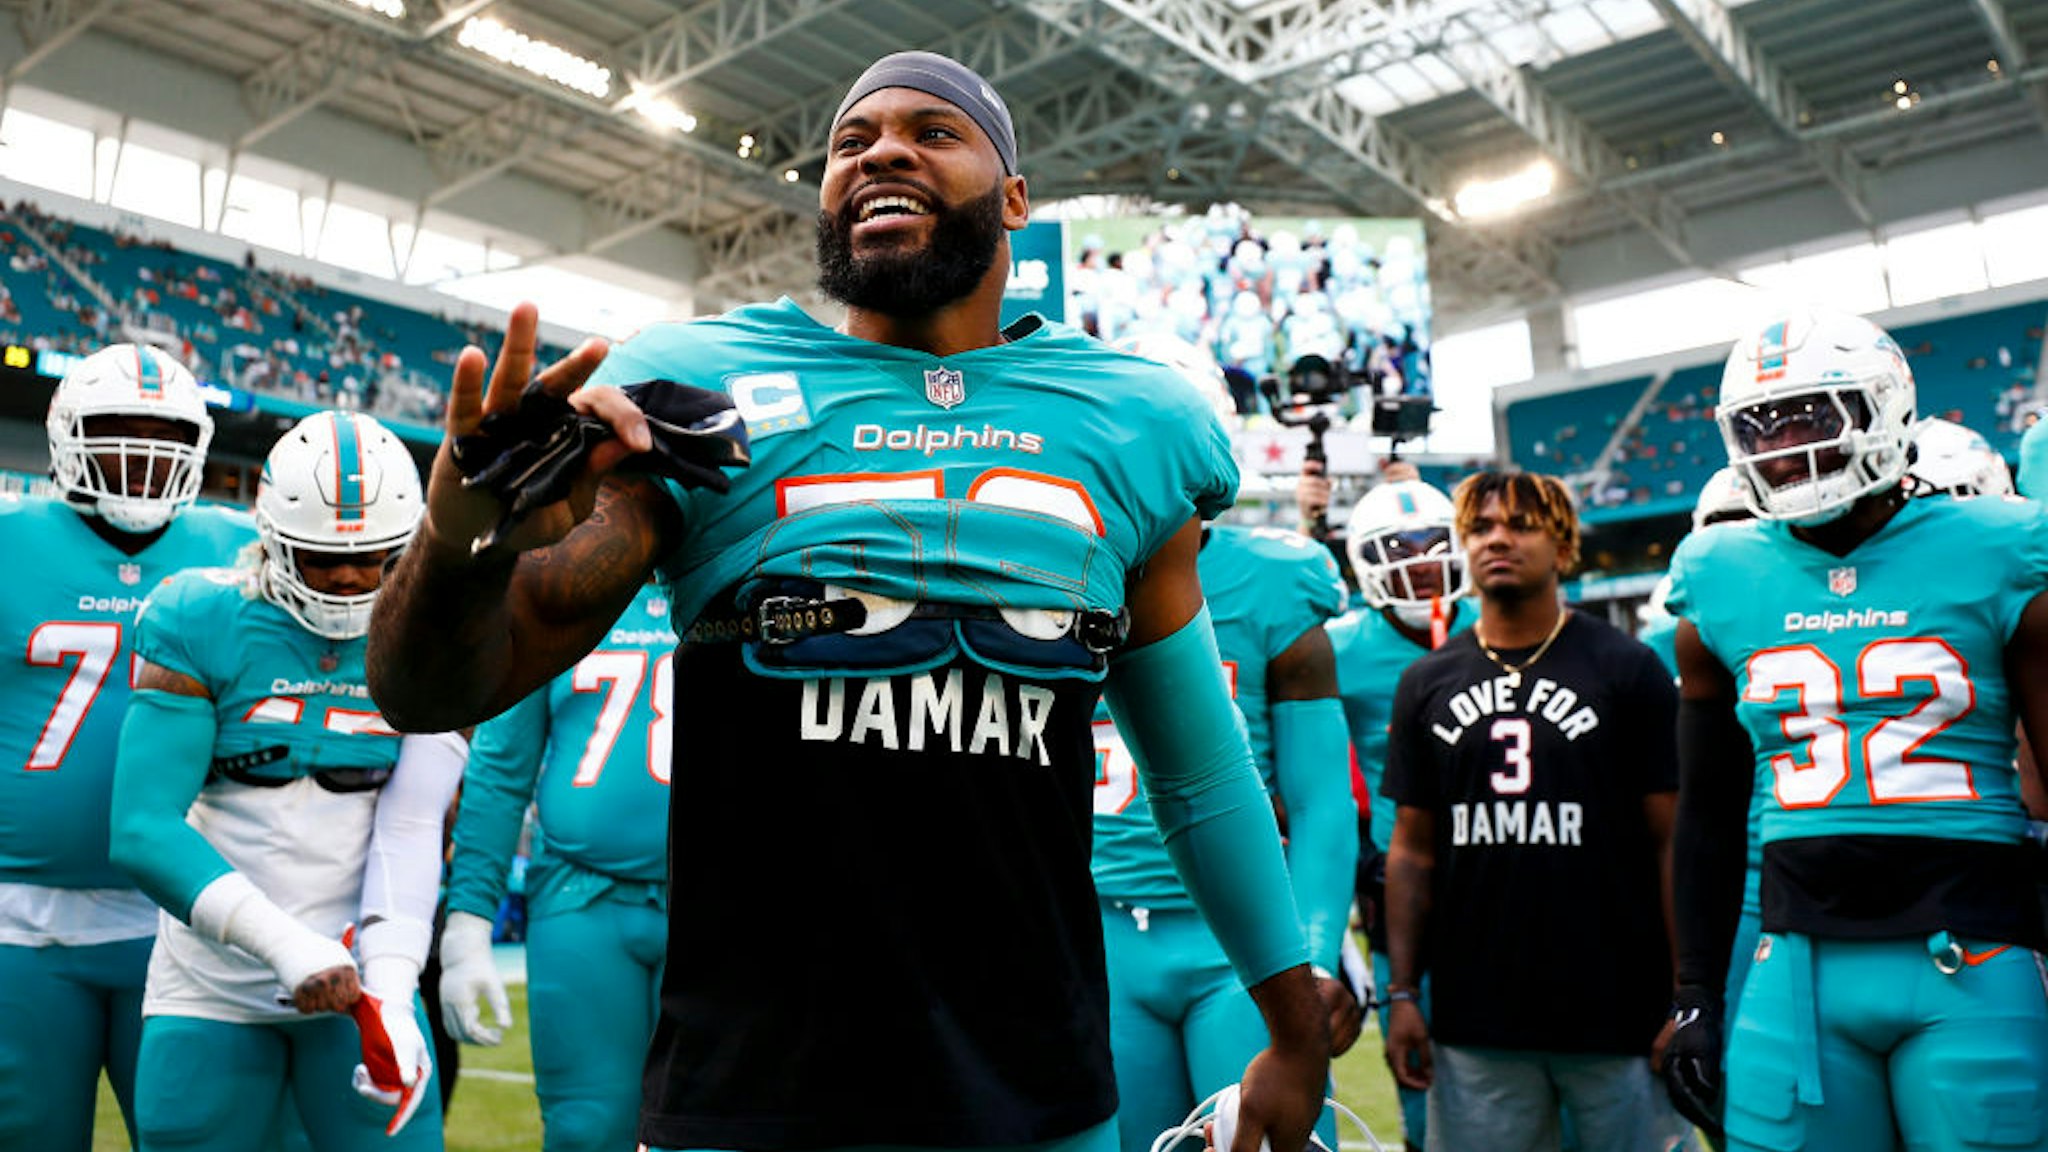 MIAMI GARDENS, FL - JANUARY 8: Elandon Roberts #52 of the Miami Dolphins gives a speech in the team huddle while wearing a shirt in honor of Damar Hamlin of the Buffalo Bills prior to an NFL football game against the New York Jets at Hard Rock Stadium on January 8, 2023 in Miami Gardens, Florida. (Photo by Kevin Sabitus/Getty Images)